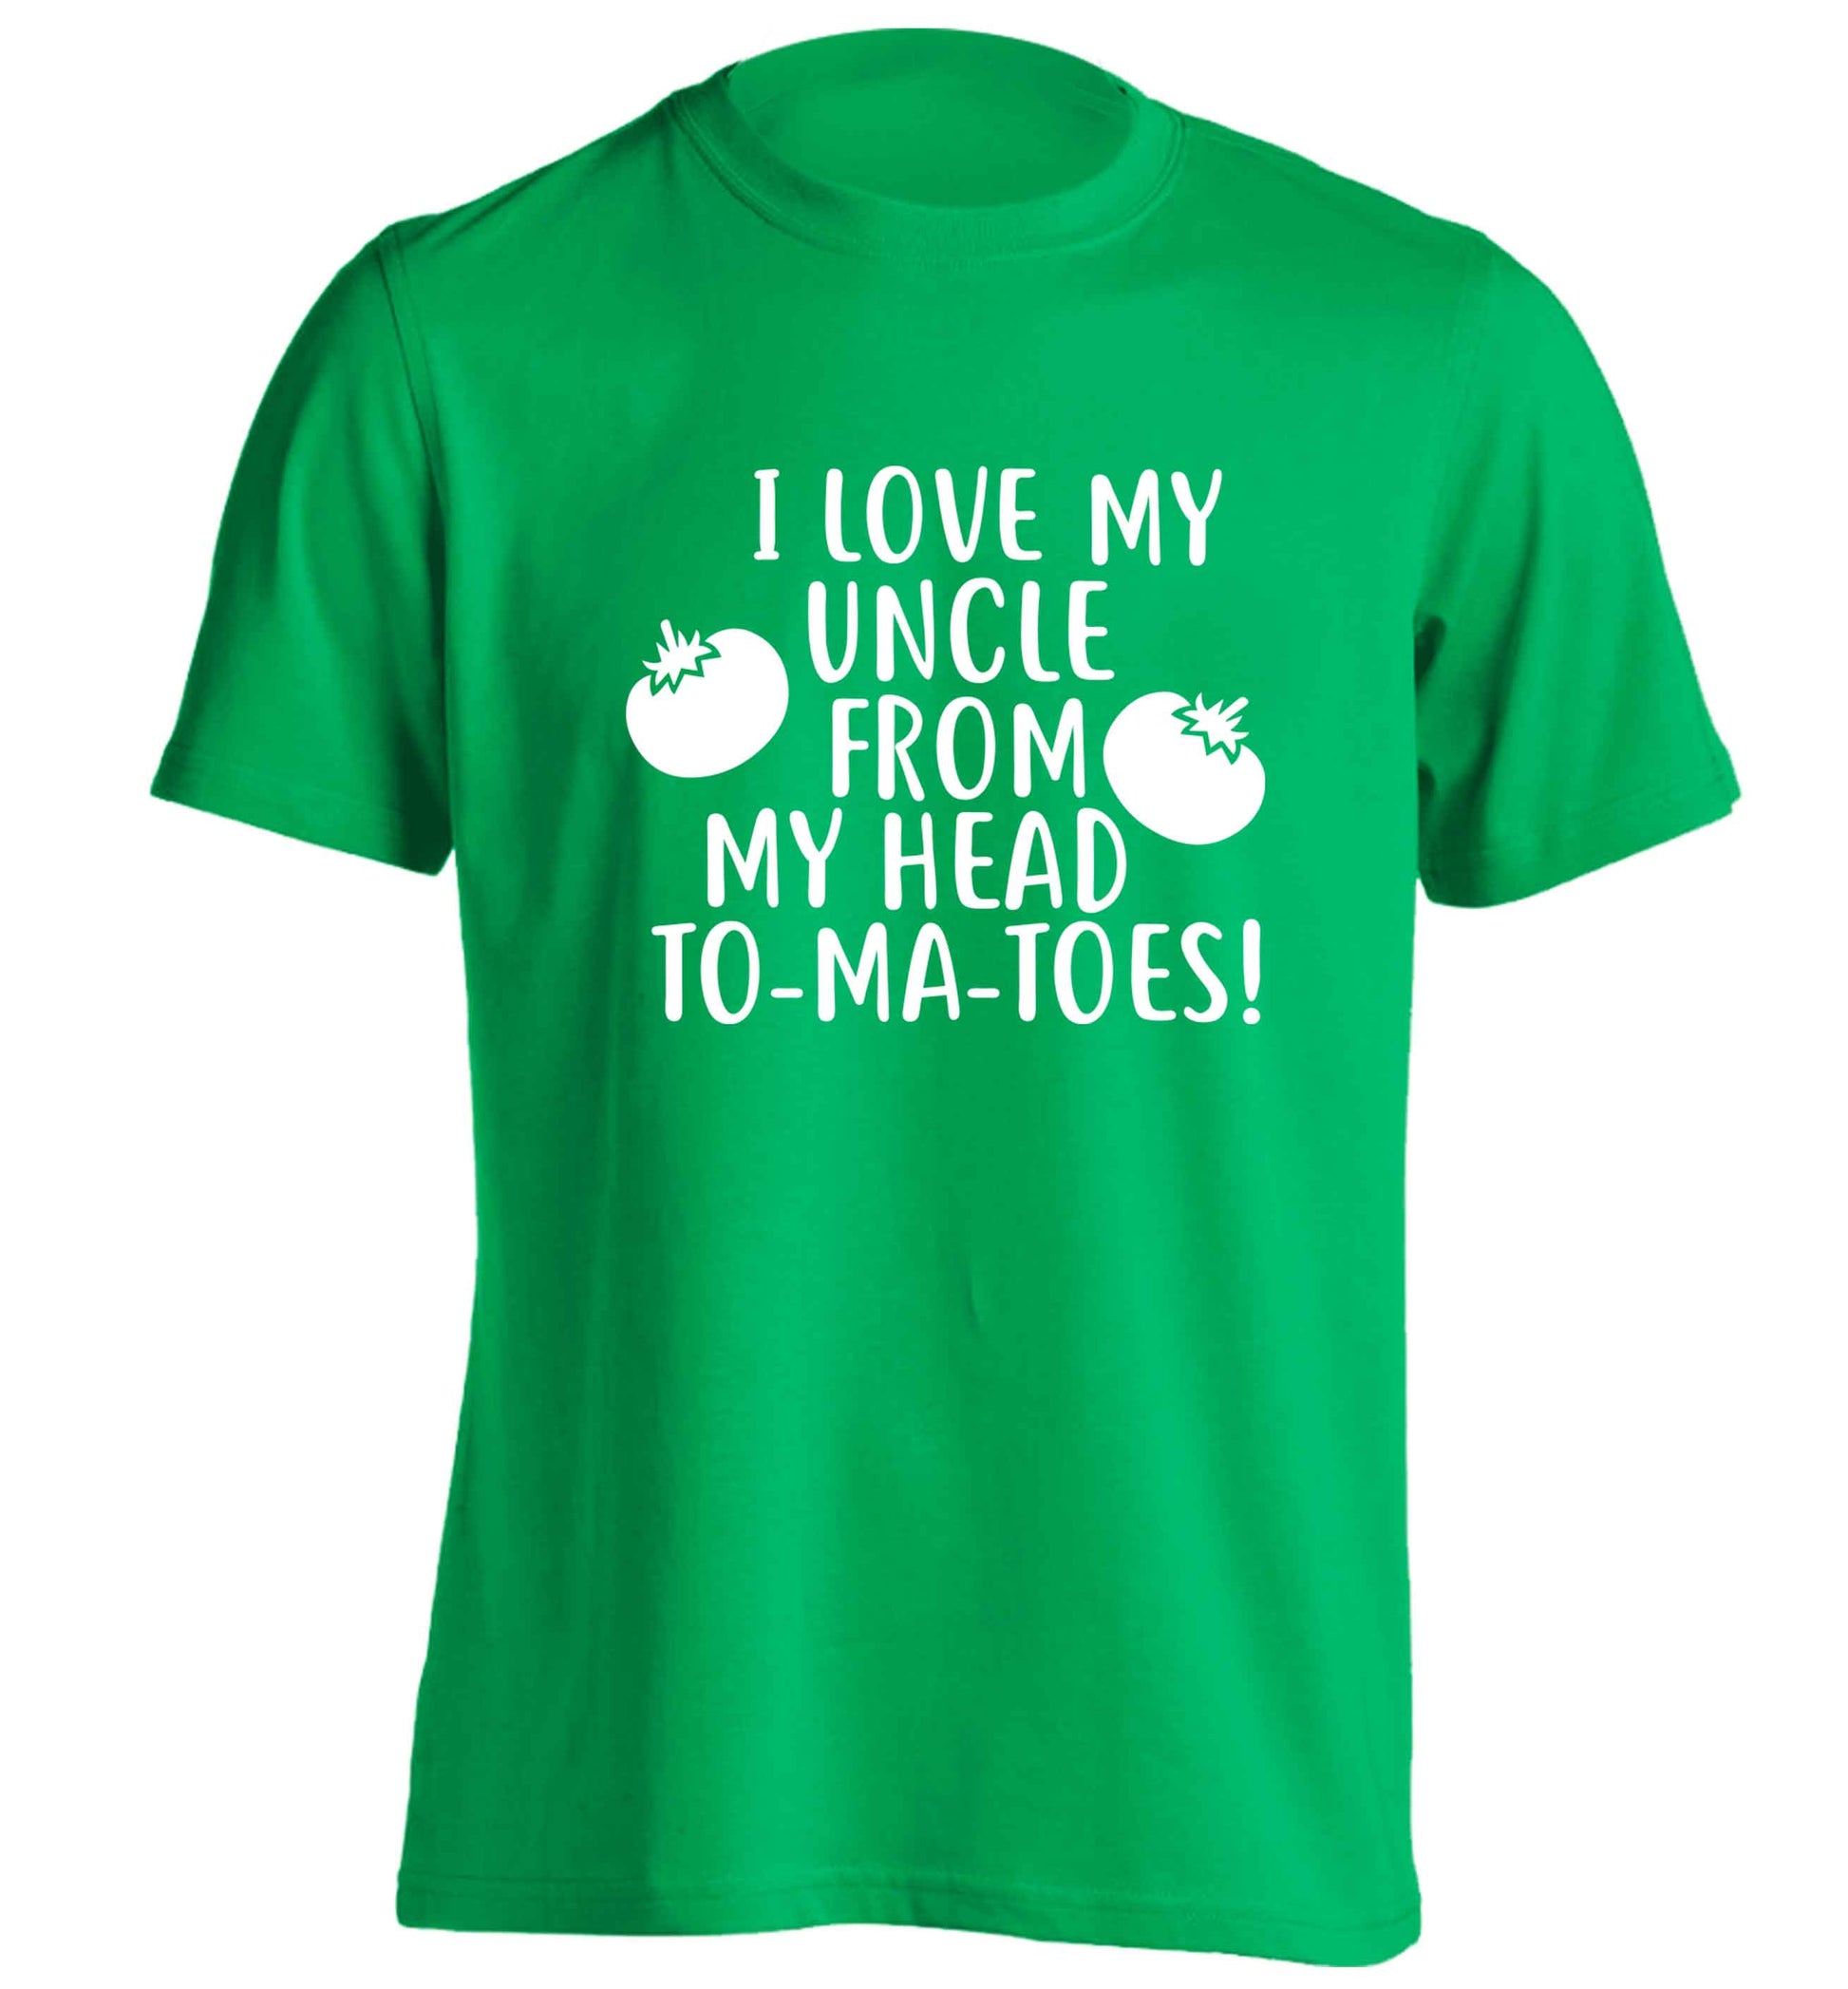 I love my uncle from my head To-Ma-Toes adults unisex green Tshirt 2XL